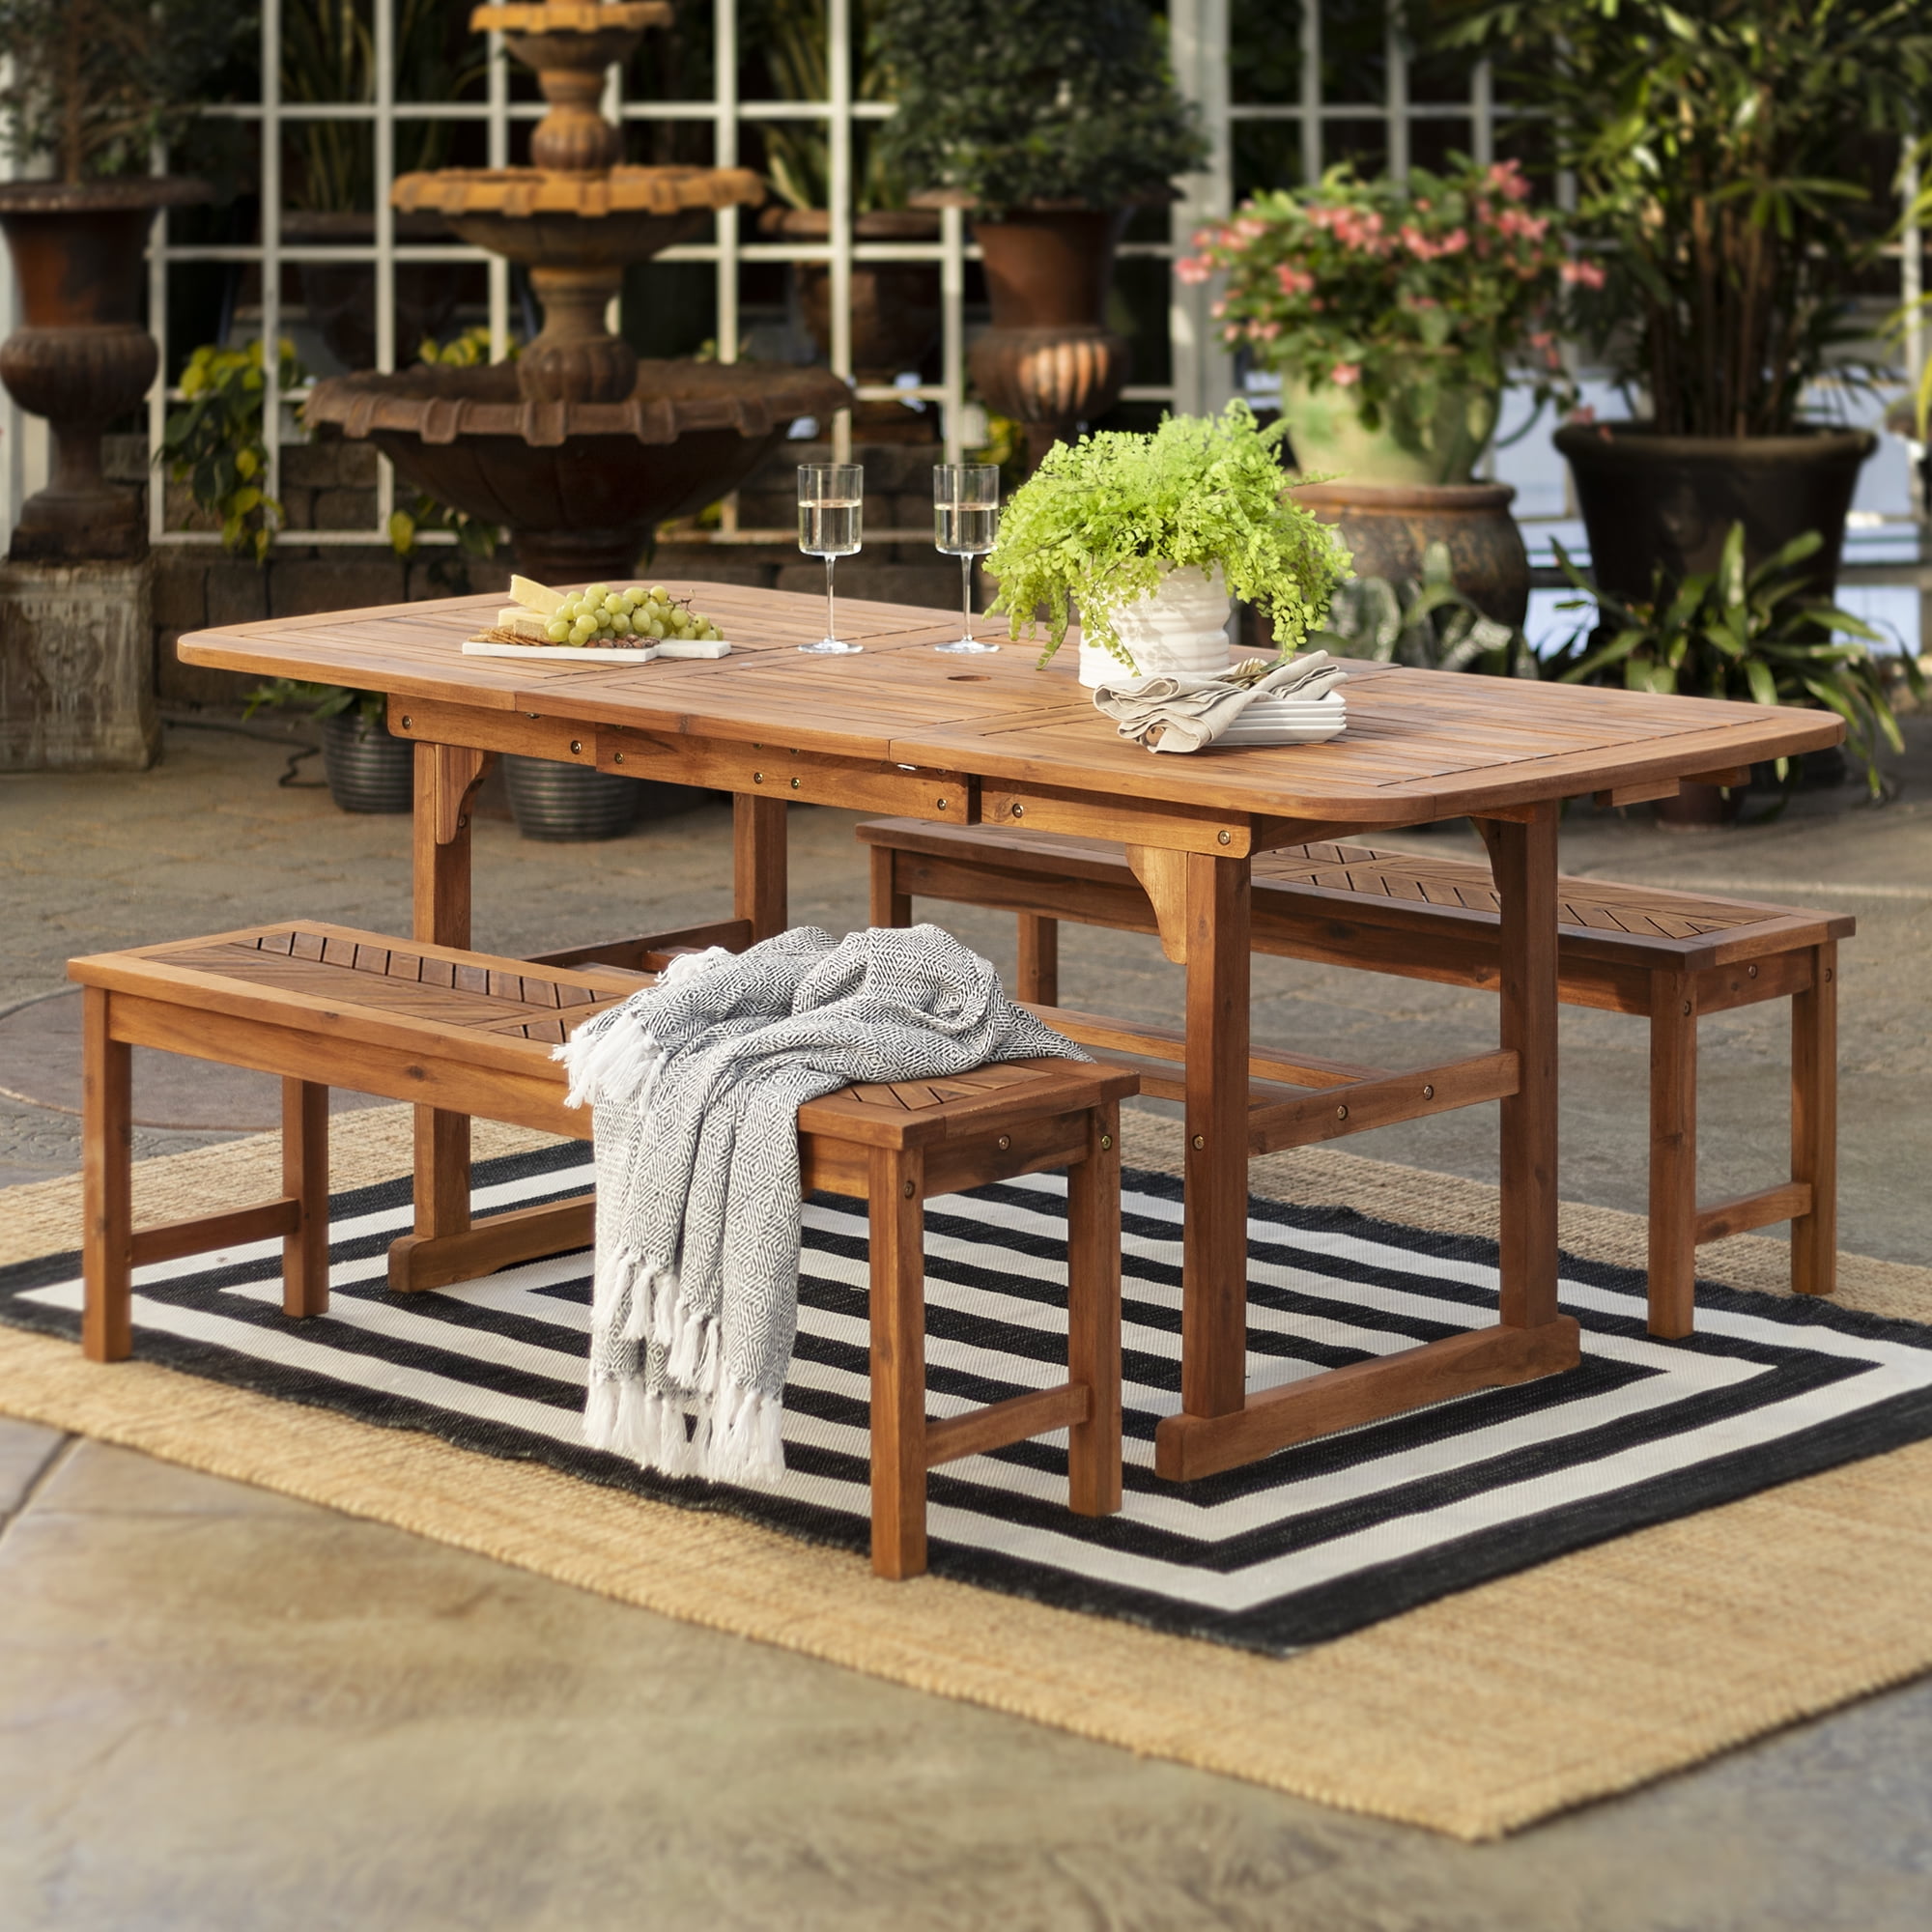 Manor Park Wooden Picnic Table With, Picnic Table Style Dining Room Set